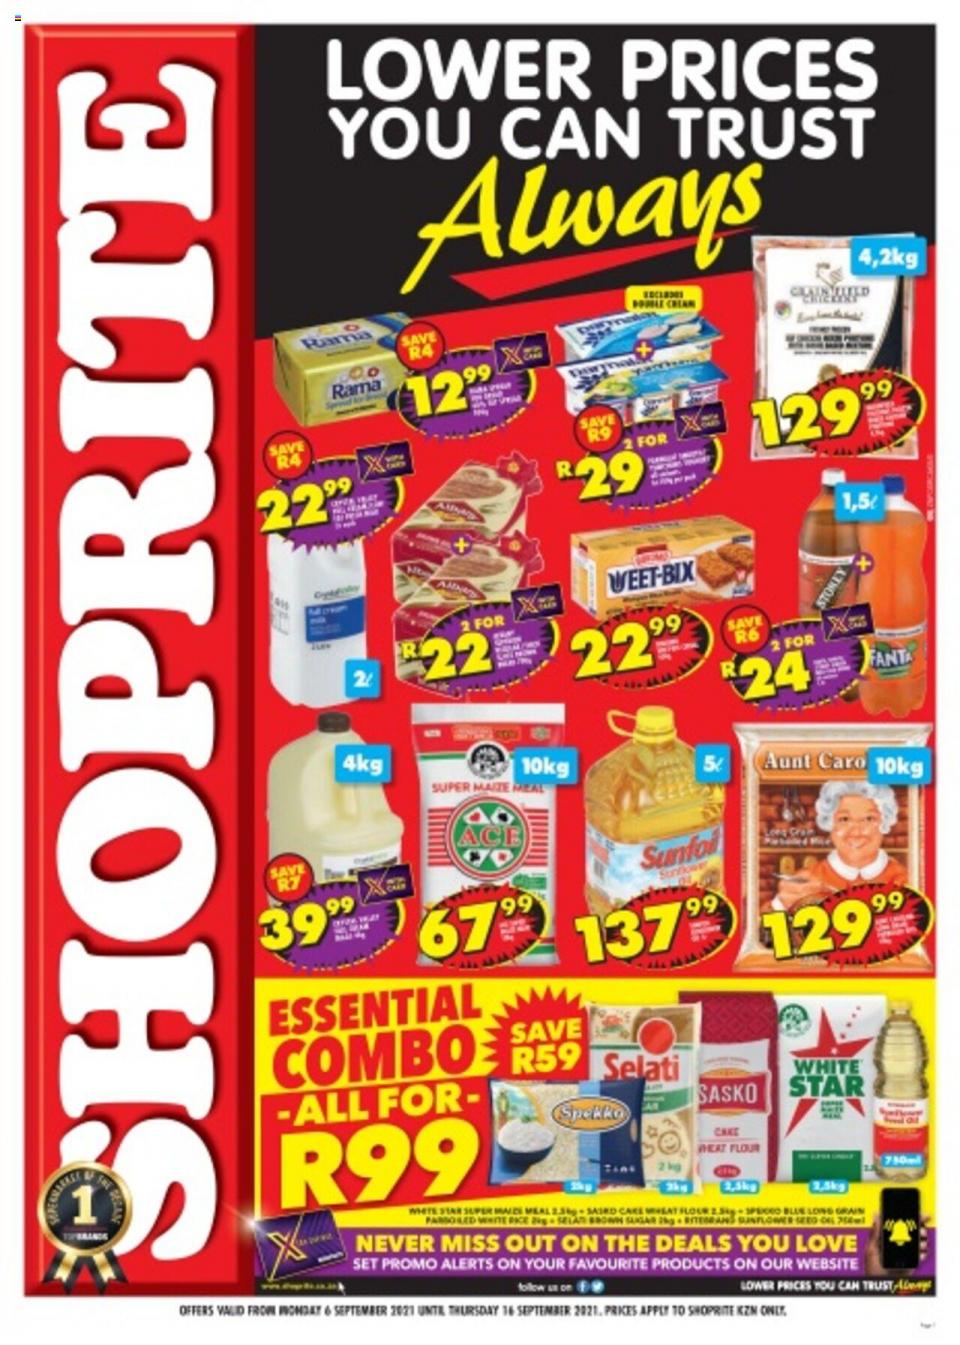 Shoprite Specials Lower Prices You Can Trust Always 6 – 16 September 2021